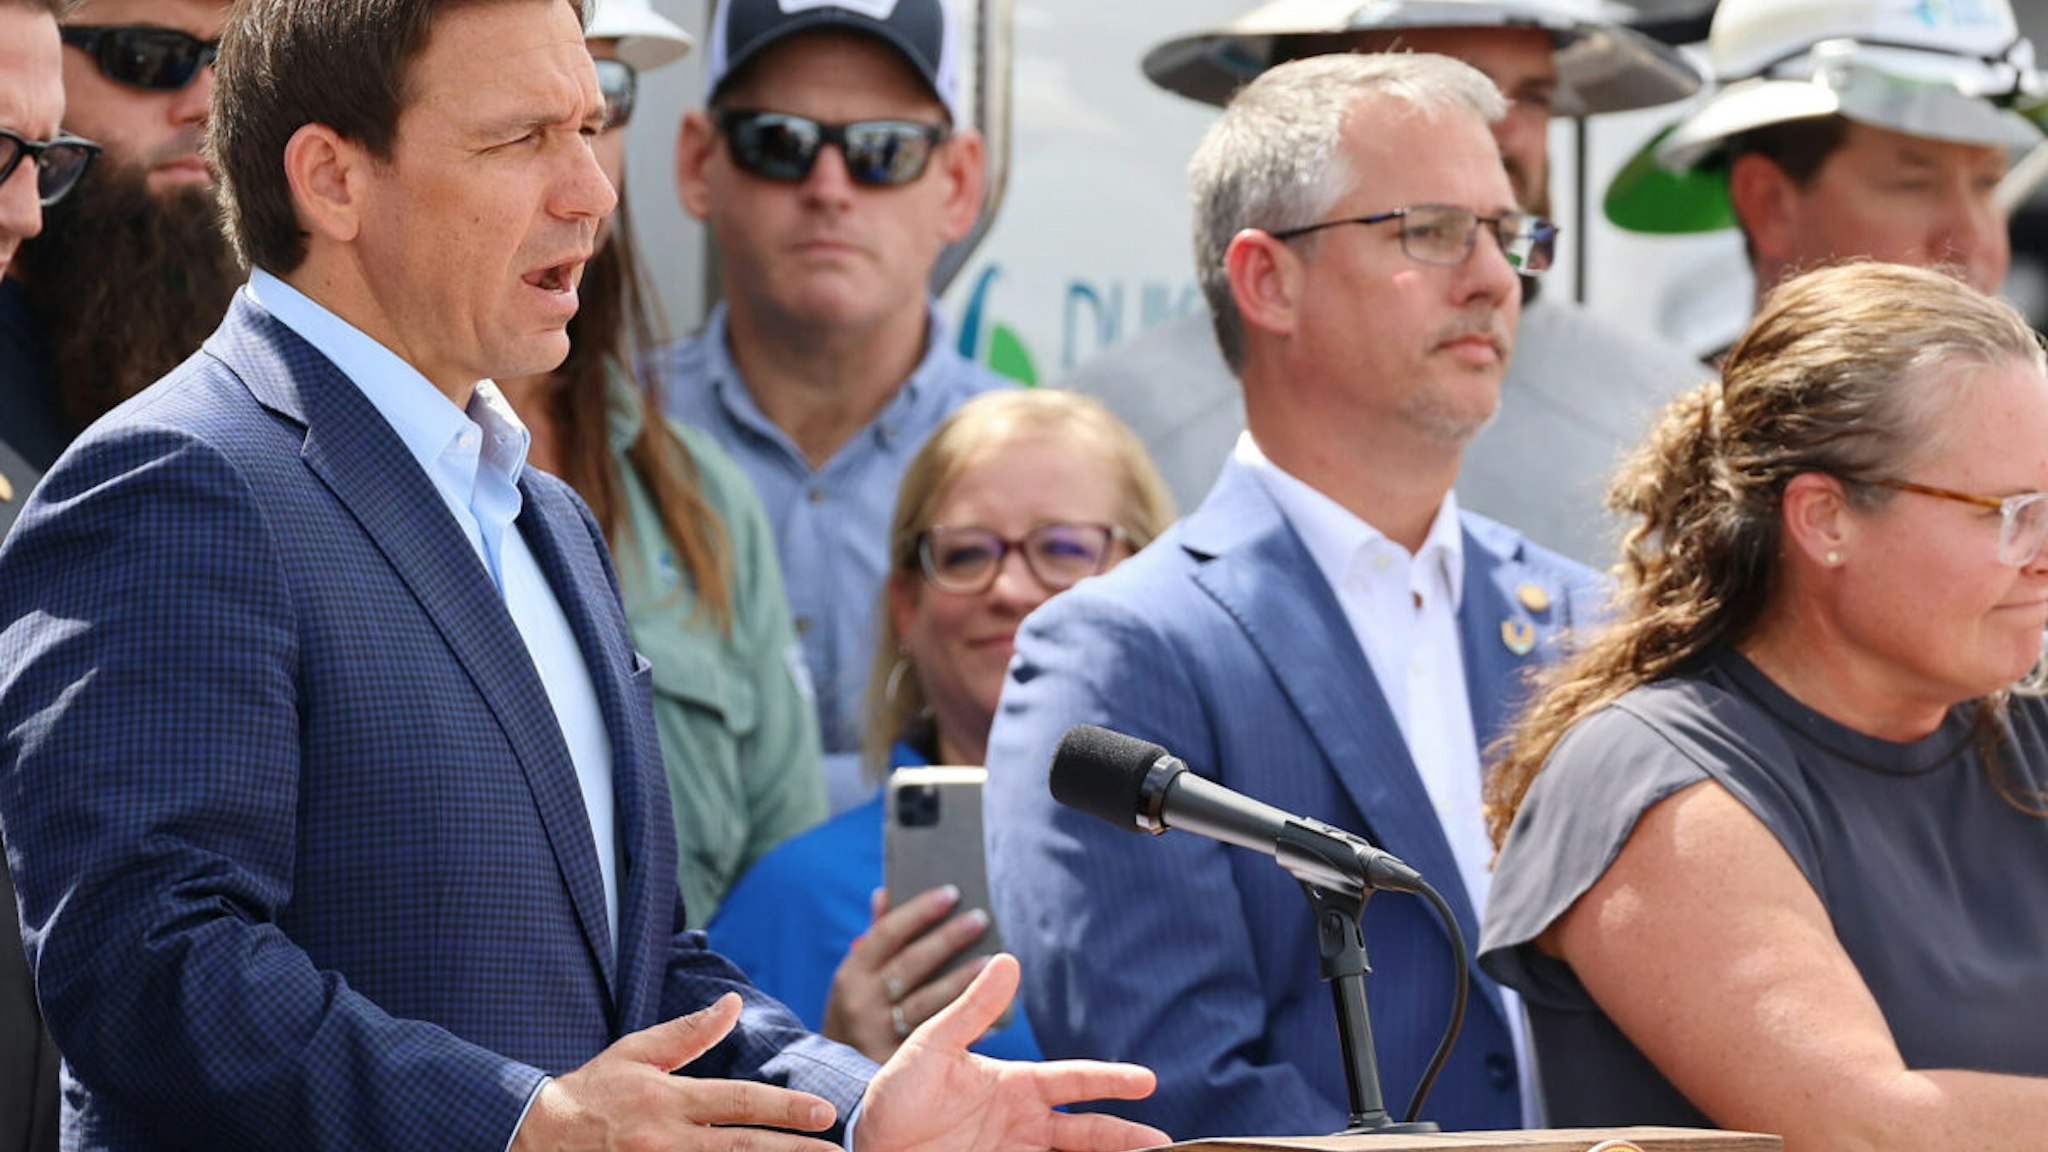 Florida Gov. Ron DeSantis speaks among Duke Energy electrical line technicians during a press conference at Duke Energy's Operations Center in Wildwood, Florida on Tuesday, Aug. 29, 2023.